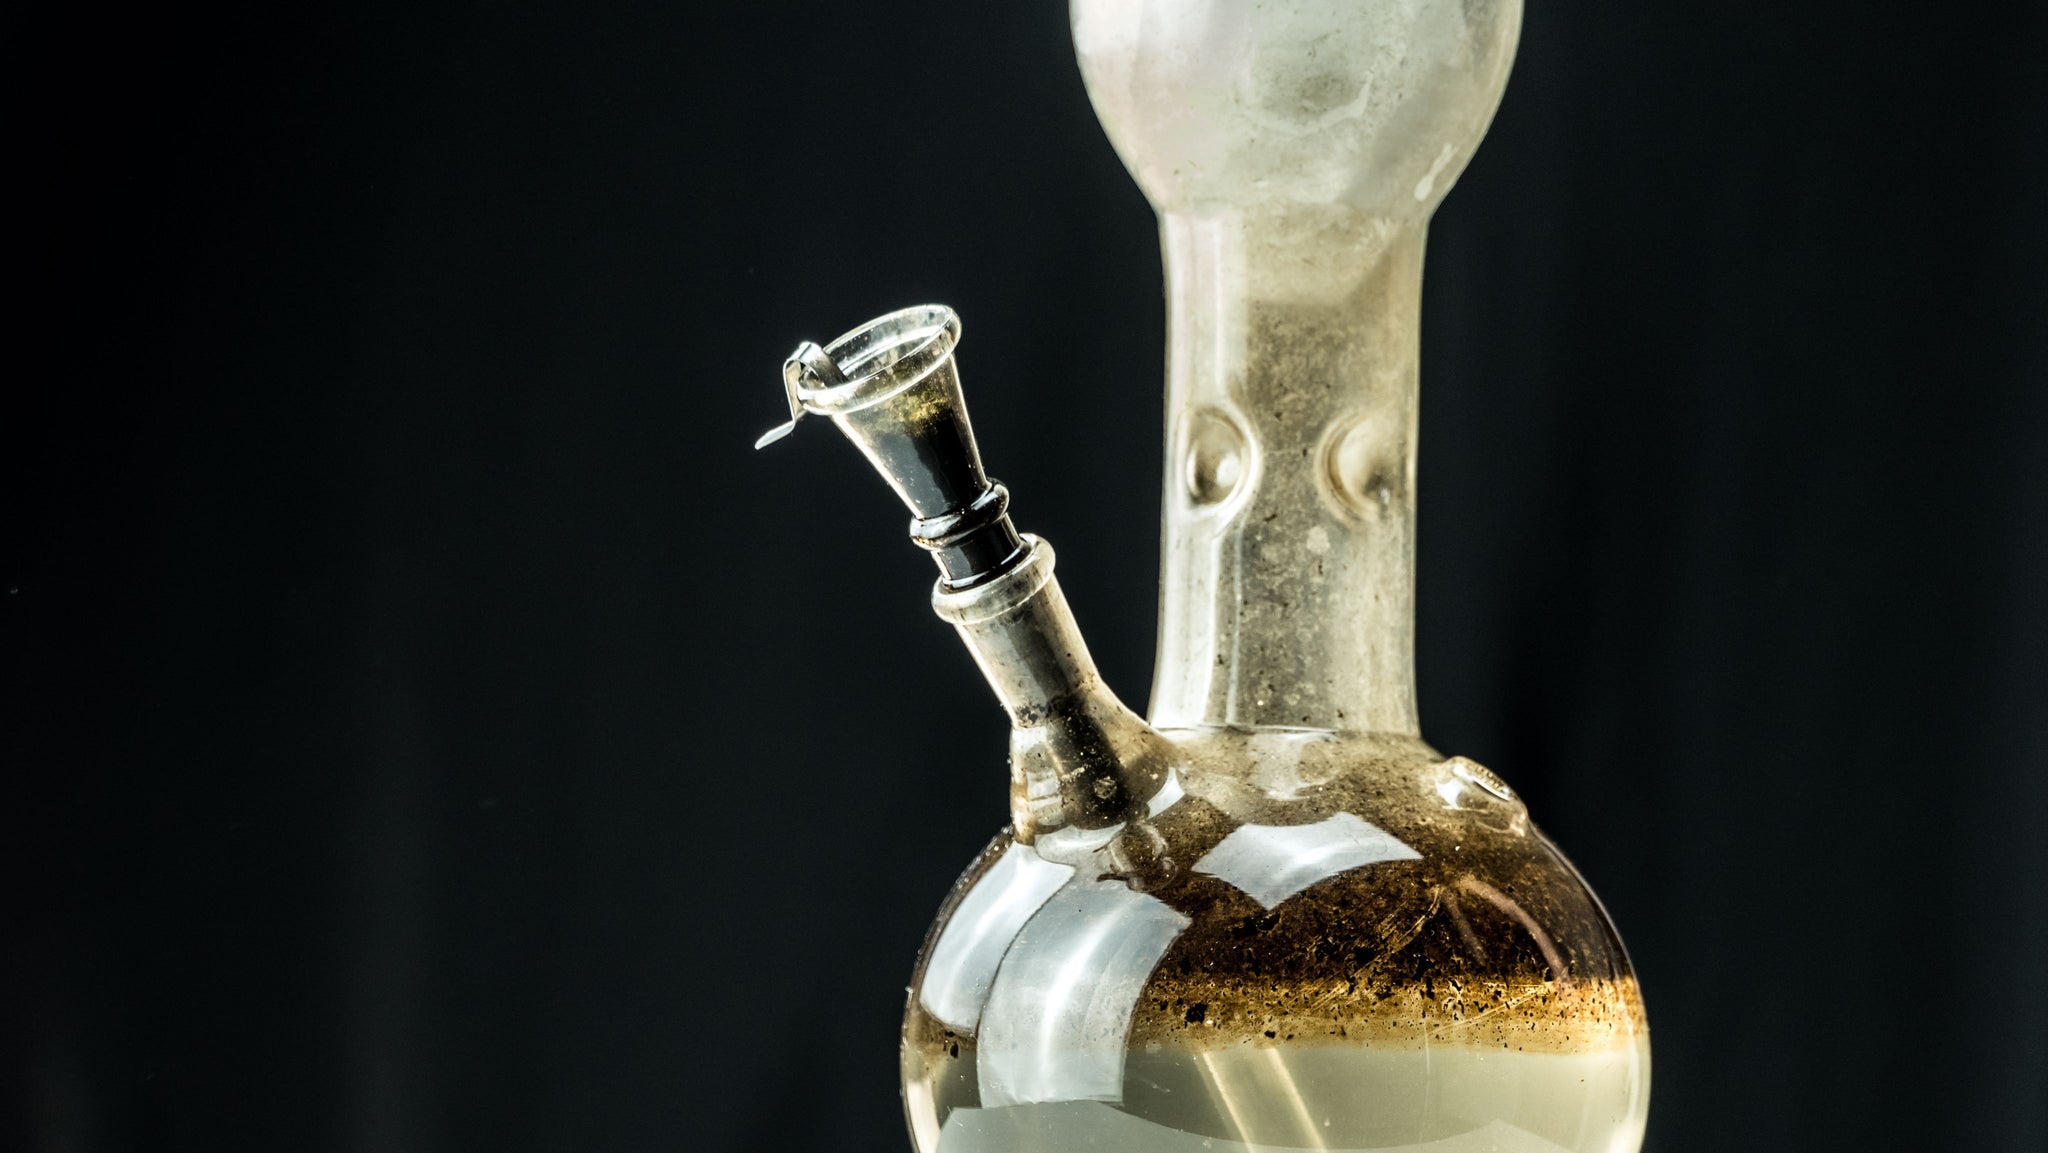 Is It Bad To Smoke Out Of A Dirty Bong? Here’s What The Experts Say